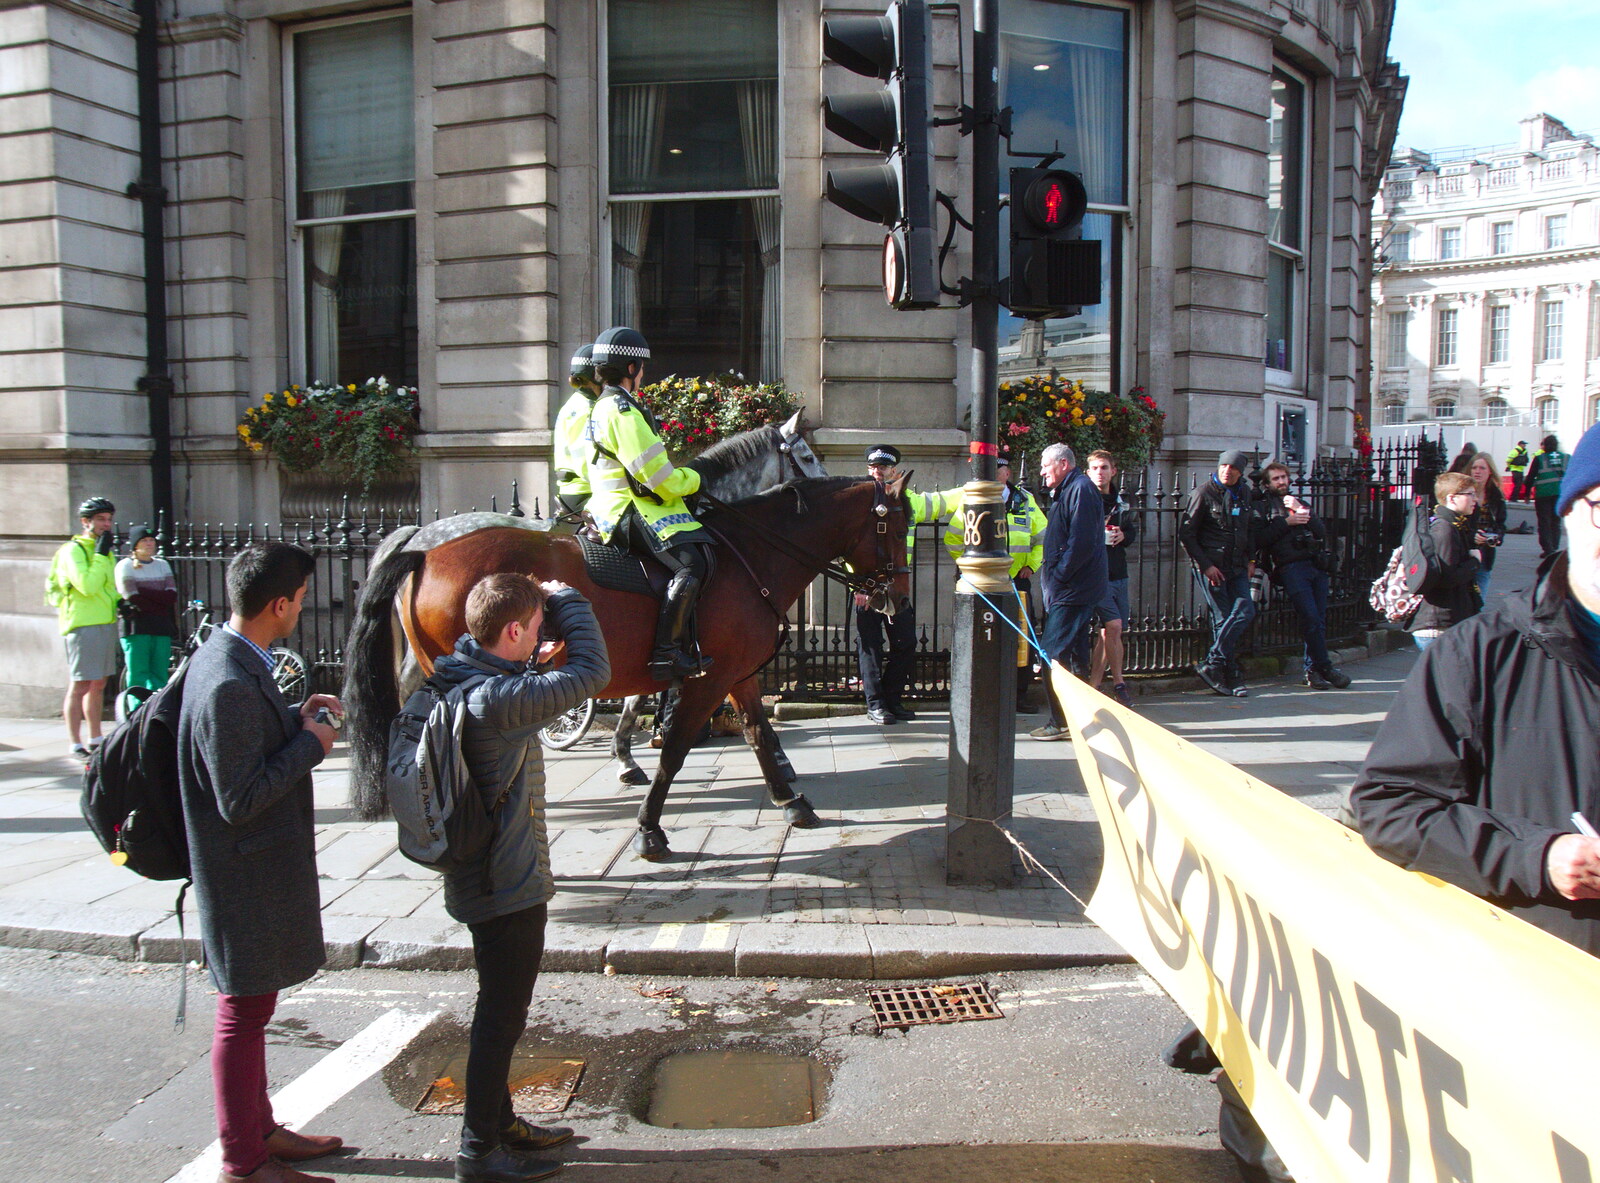 Rozzers on horseback on Whitehall from The Extinction Rebellion Protest, Westminster, London - 9th October 2019